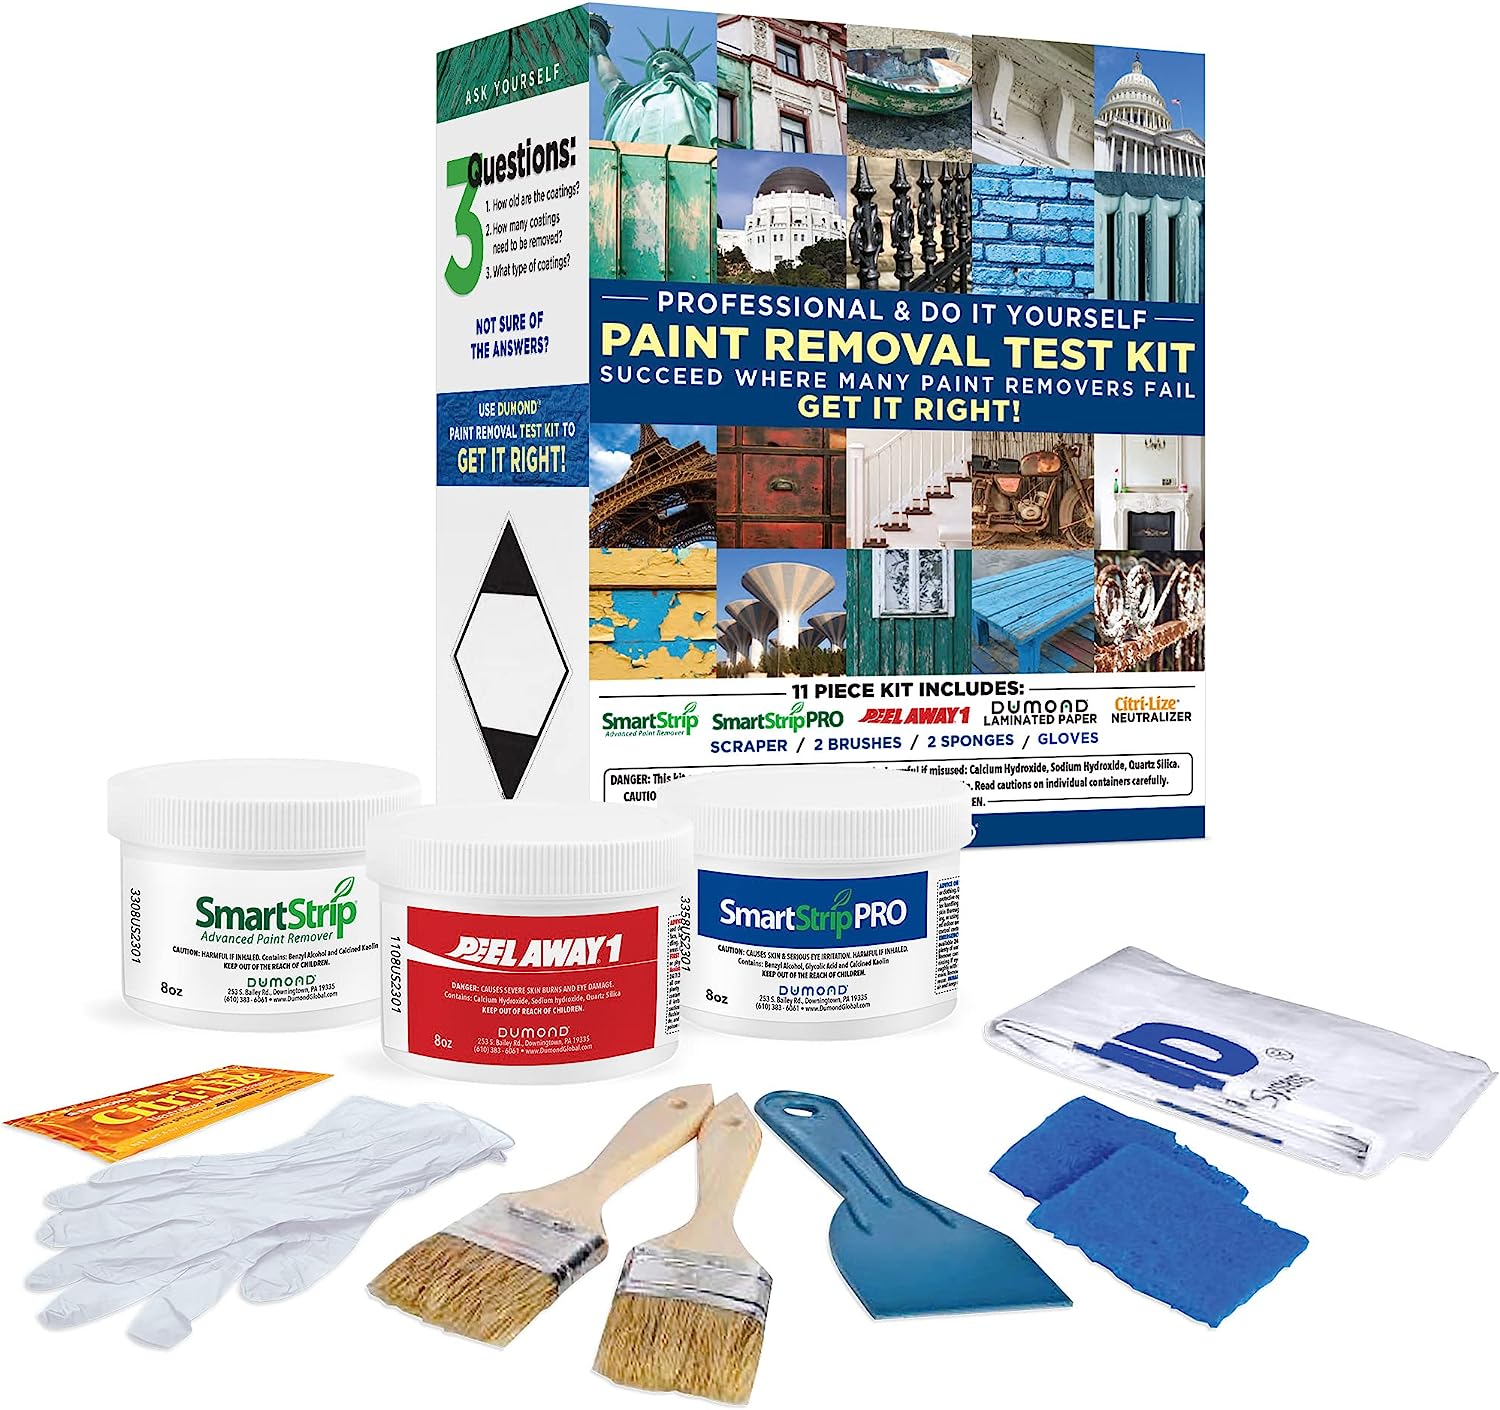 Dumond Complete Paint Removal Test Kit - Find the Right Paint Remover for Your Project